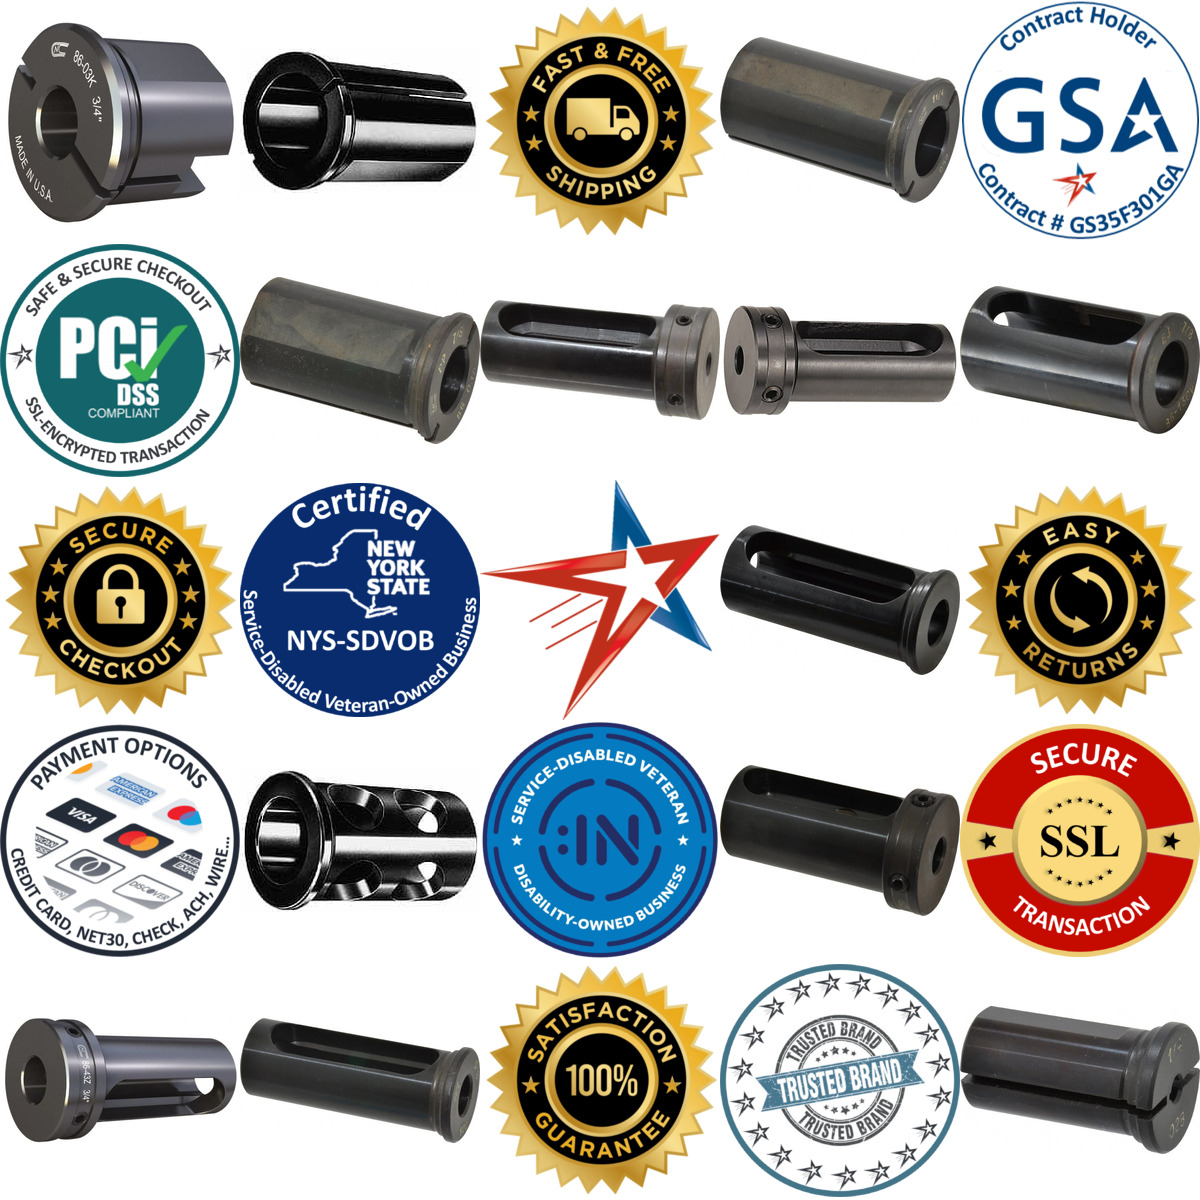 A selection of Global Cnc Industries products on GoVets